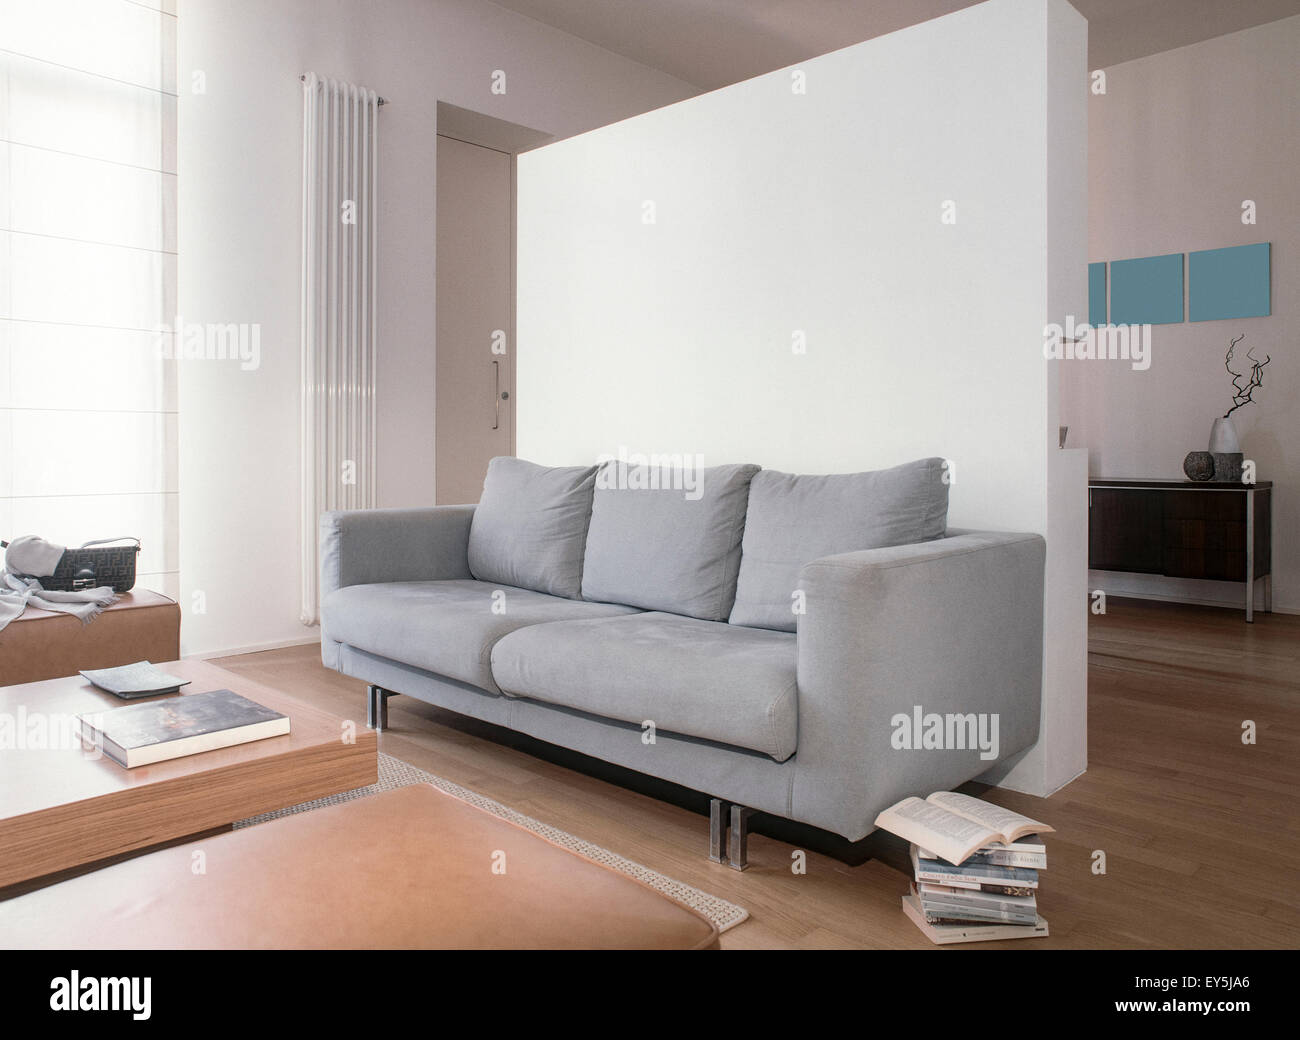 gray fabric sofa in the modern living room with wood floor Stock Photo